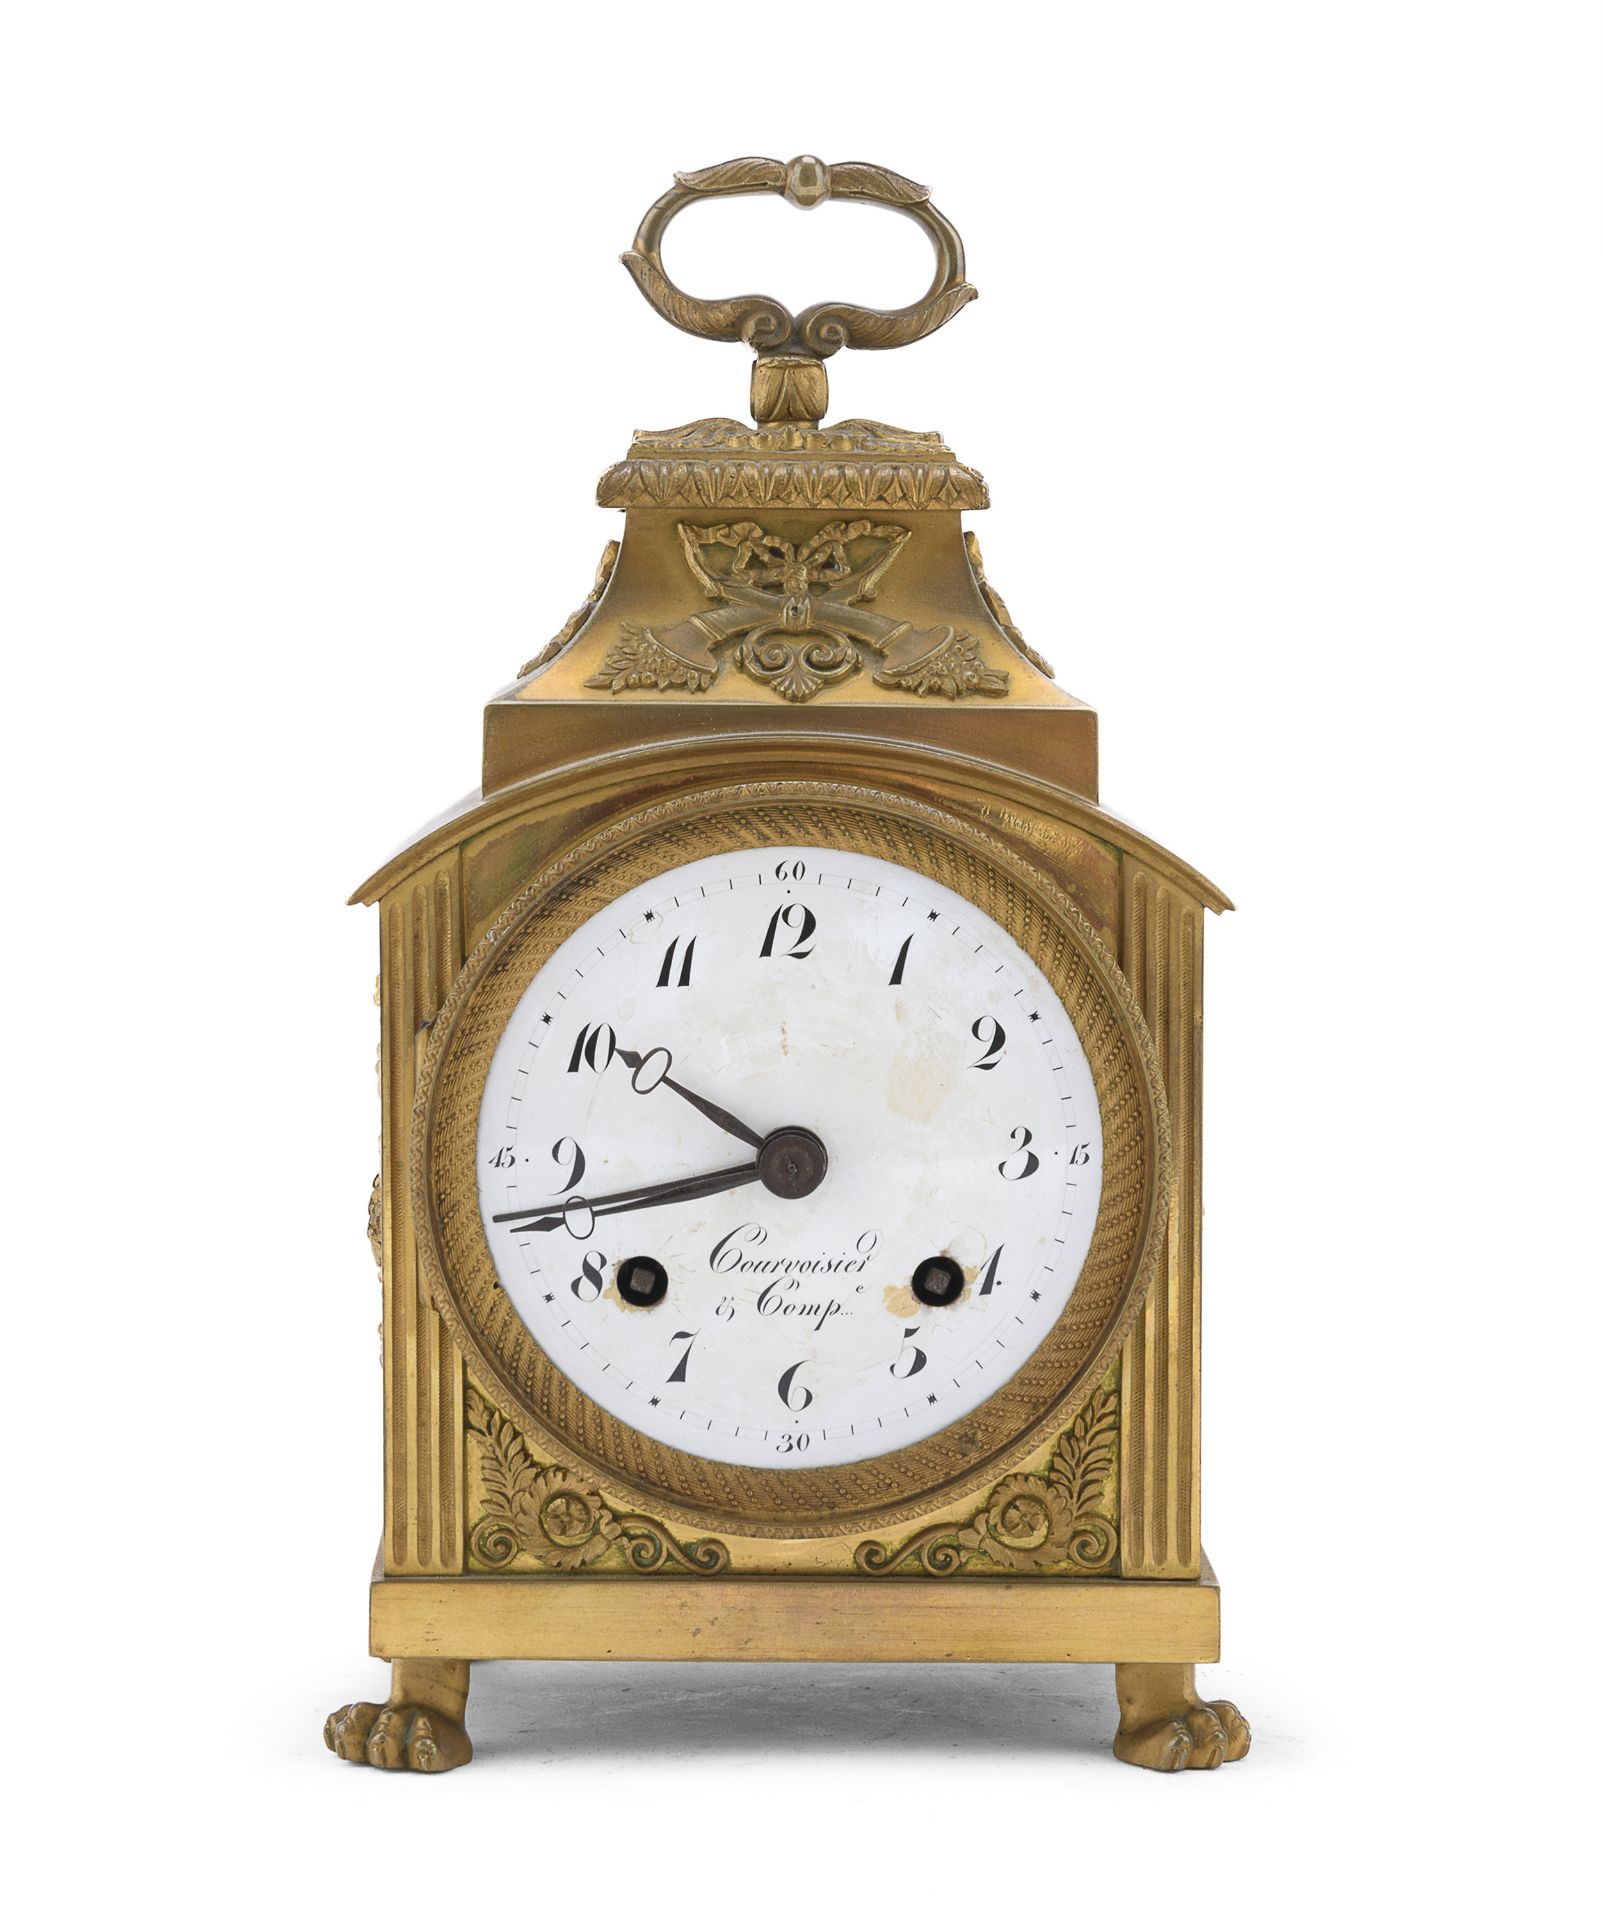 GILT BRONZE CARRIAGE CLOCK FRANCE COURVOISIER & COMP. LATE 18TH EARLY 19TH CENTURY